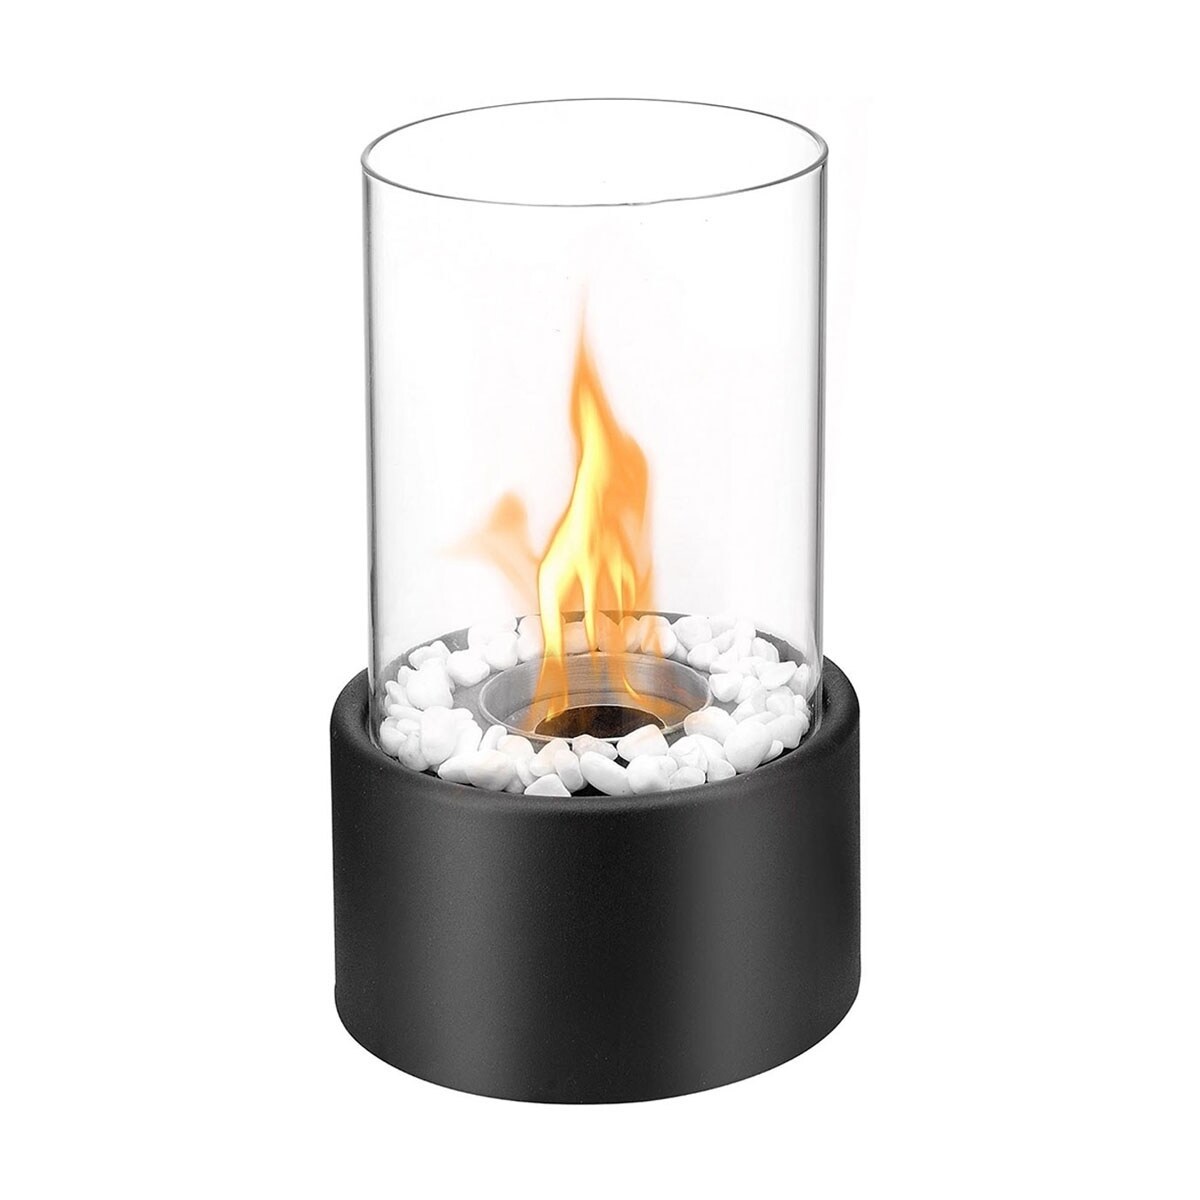 Realistic Clean Burning Like Gel Fireplaces or Propane Firepits Regal Flame Veranda Ventless Indoor Outdoor Fire Pit Tabletop Portable Fire Bowl Pot Bio Ethanol Fireplace in White